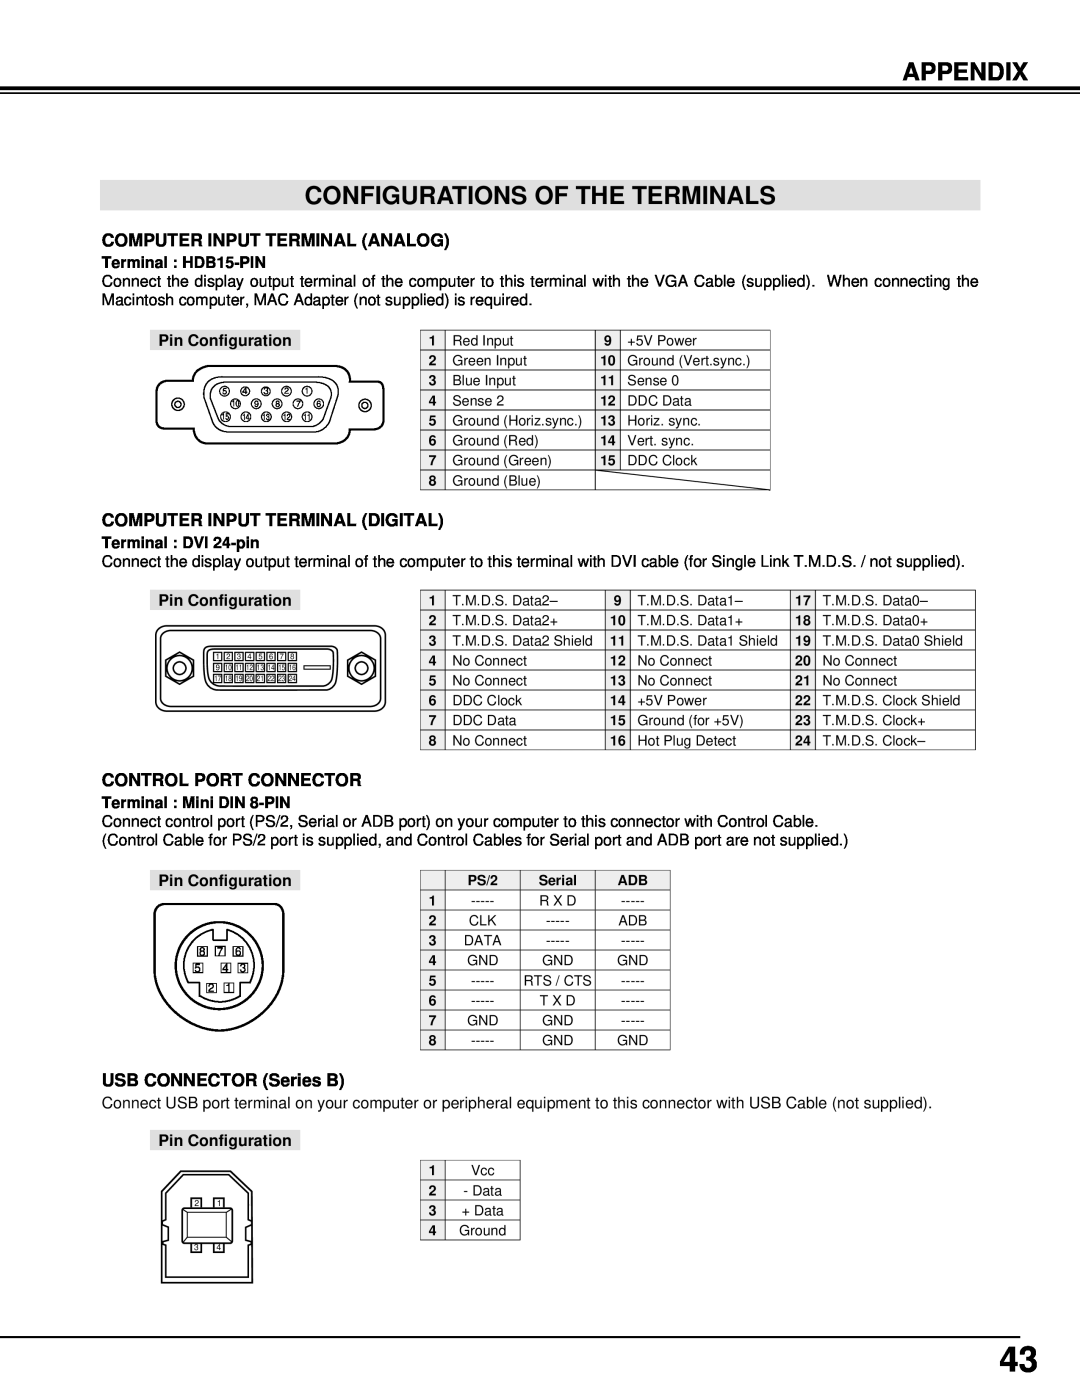 Eiki LC-NB3W Appendix Configurations Of The Terminals, Terminal HDB15-PIN, Pin Configuration, Terminal DVI 24-pin 